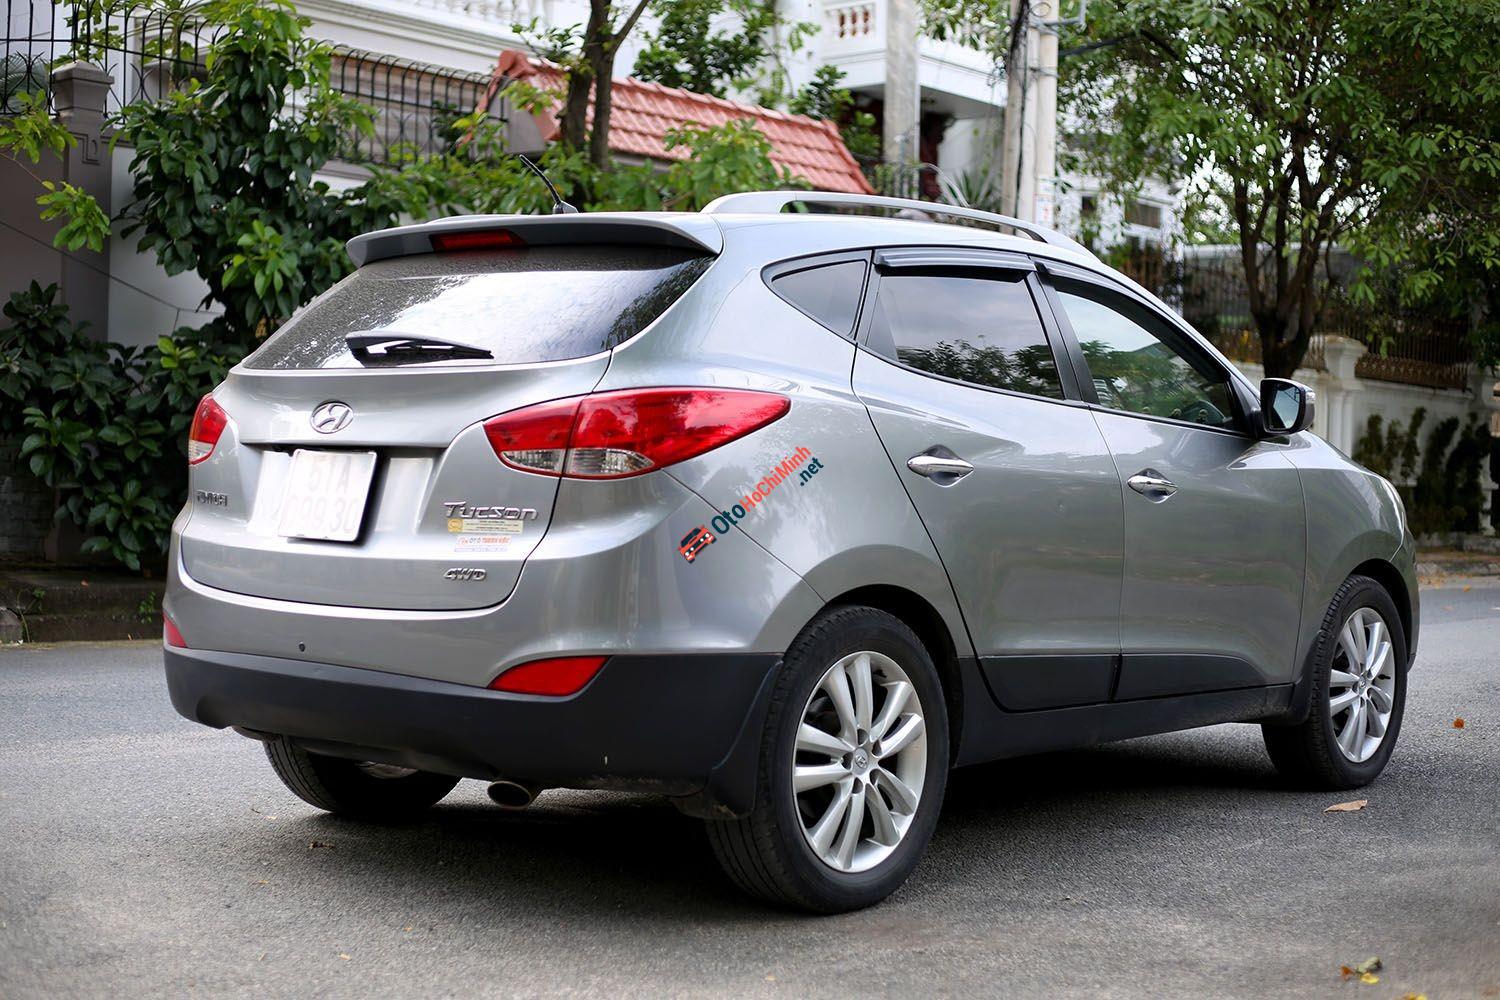 2010 Hyundai Tucson 2015 Hyundai Tucson 2008 Hyundai Tucson 2011 Hyundai  Tucson 2017 Hyundai Tucson hyundai compact Car car png  PNGEgg